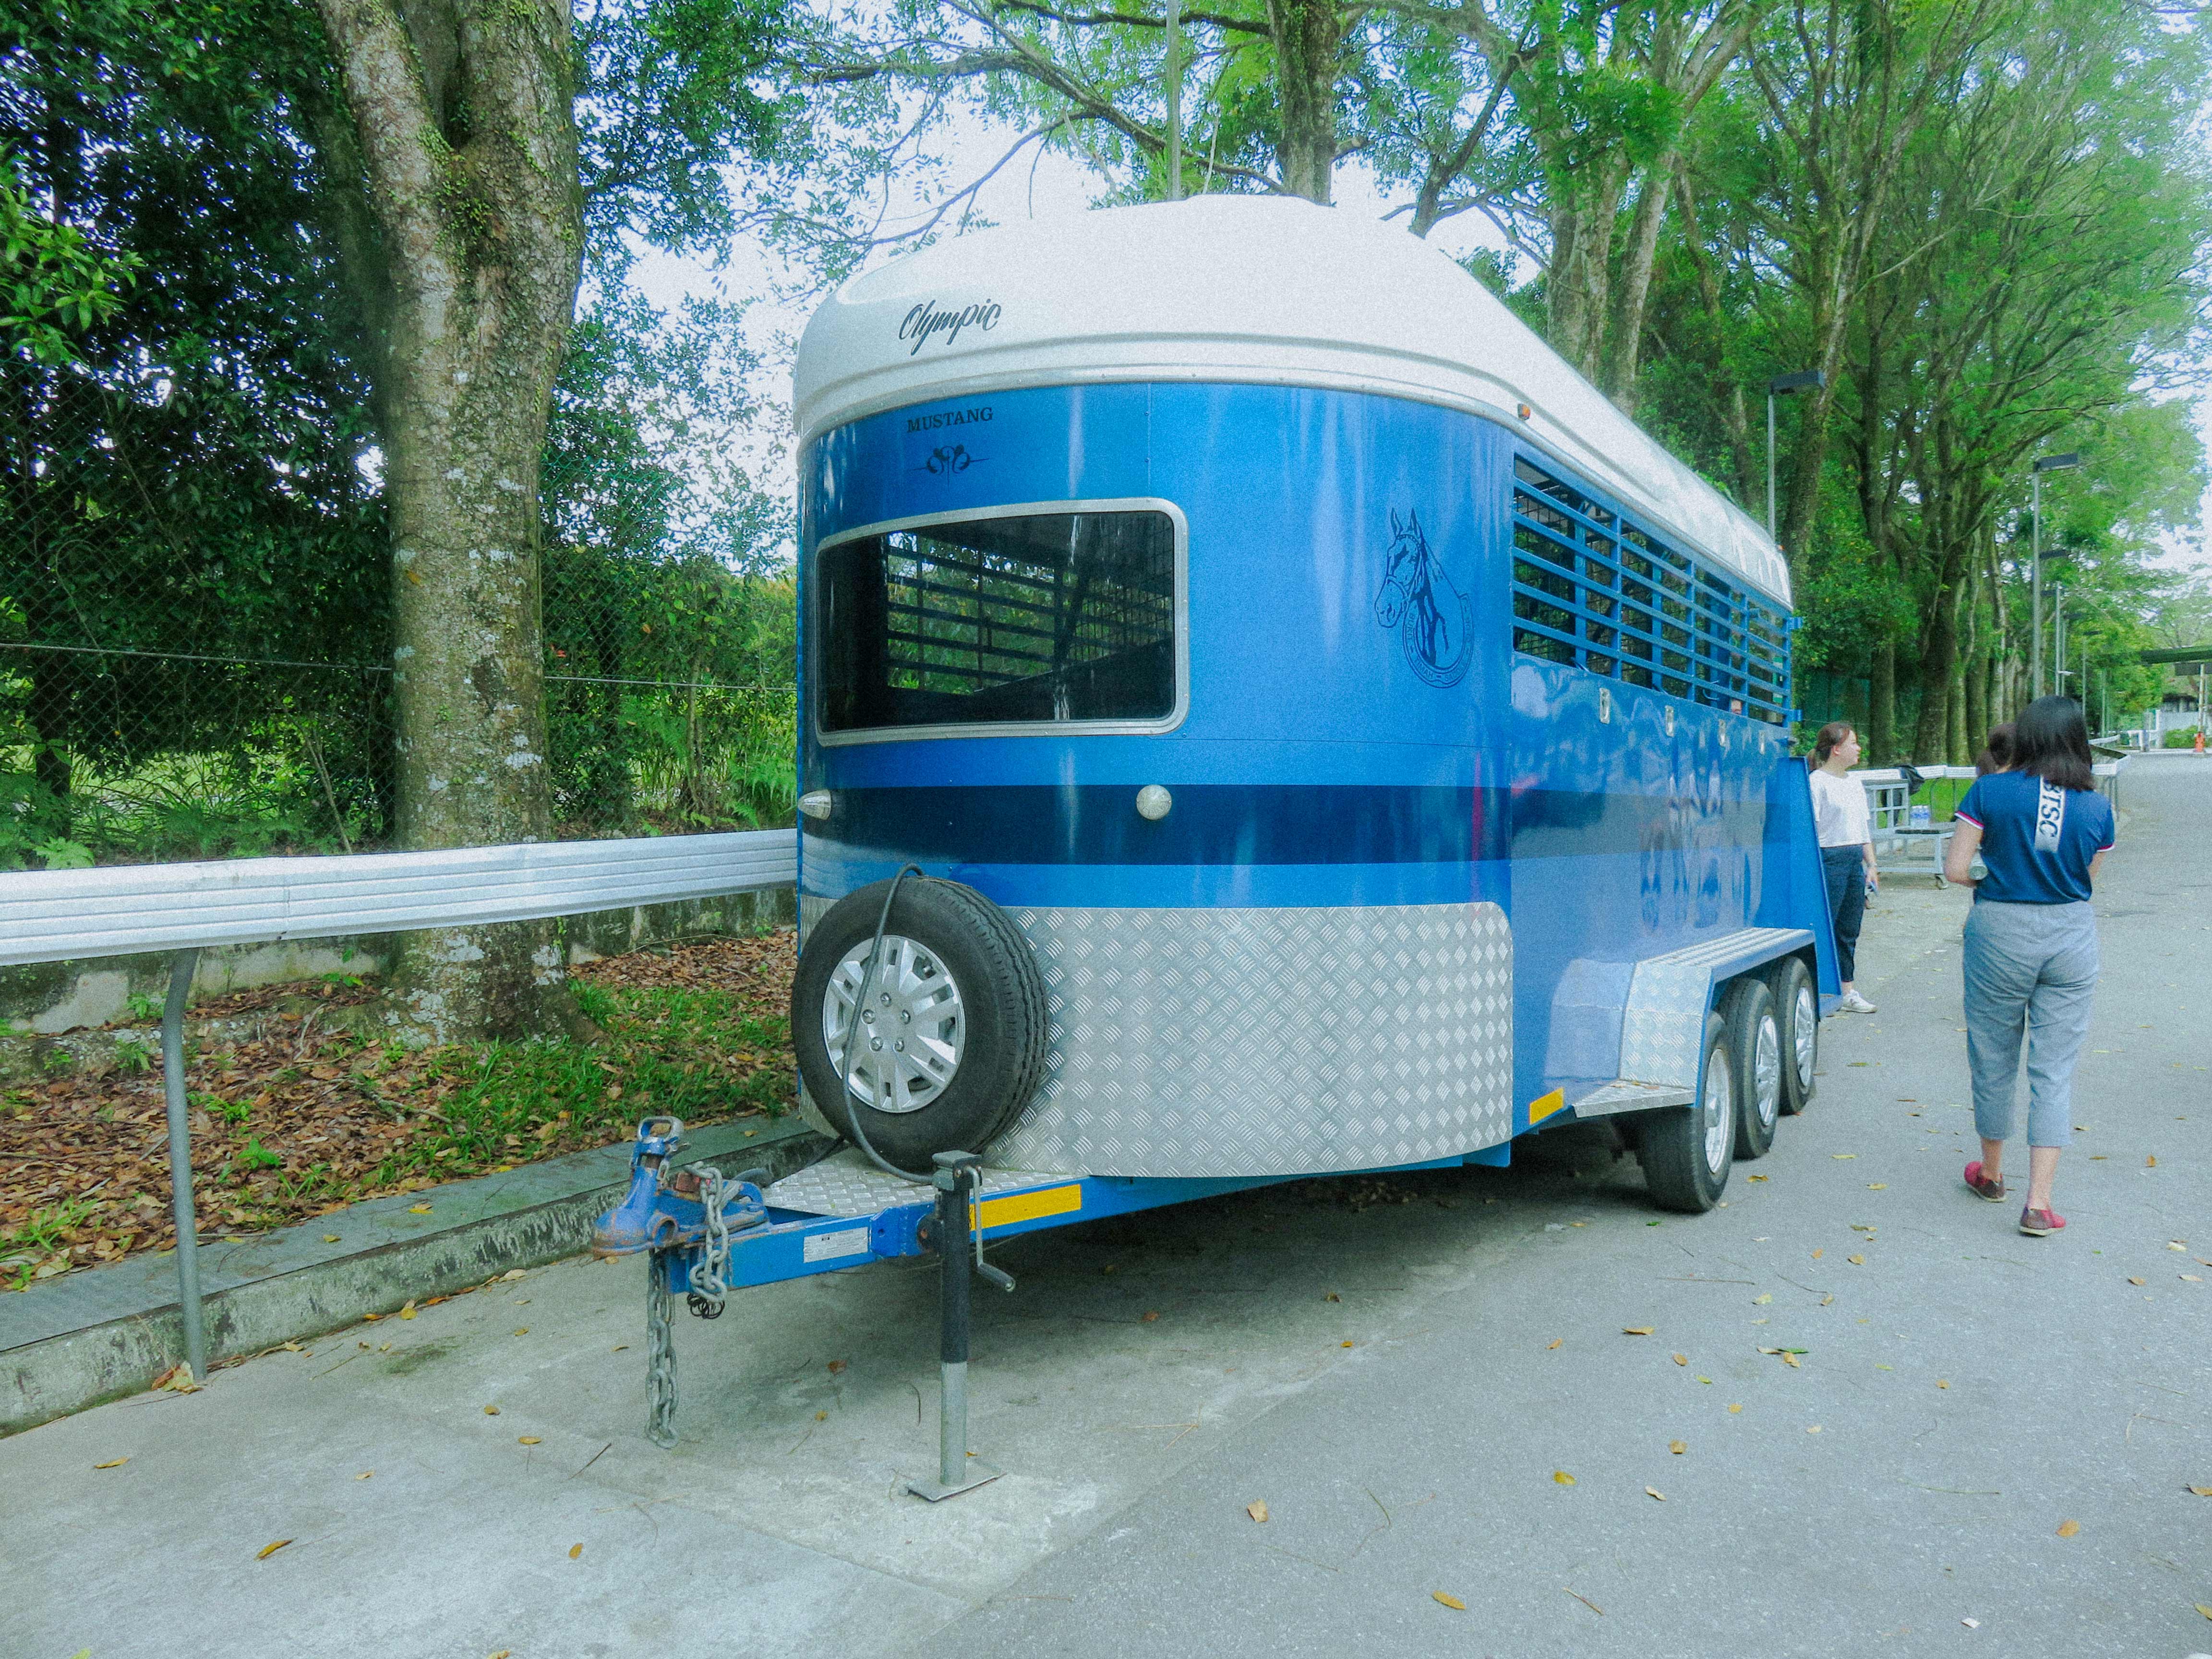 The Bukit Timah Saddle Club (BTSC) trailer used to transport horses around can go up to 50km/h even on the expressway. 